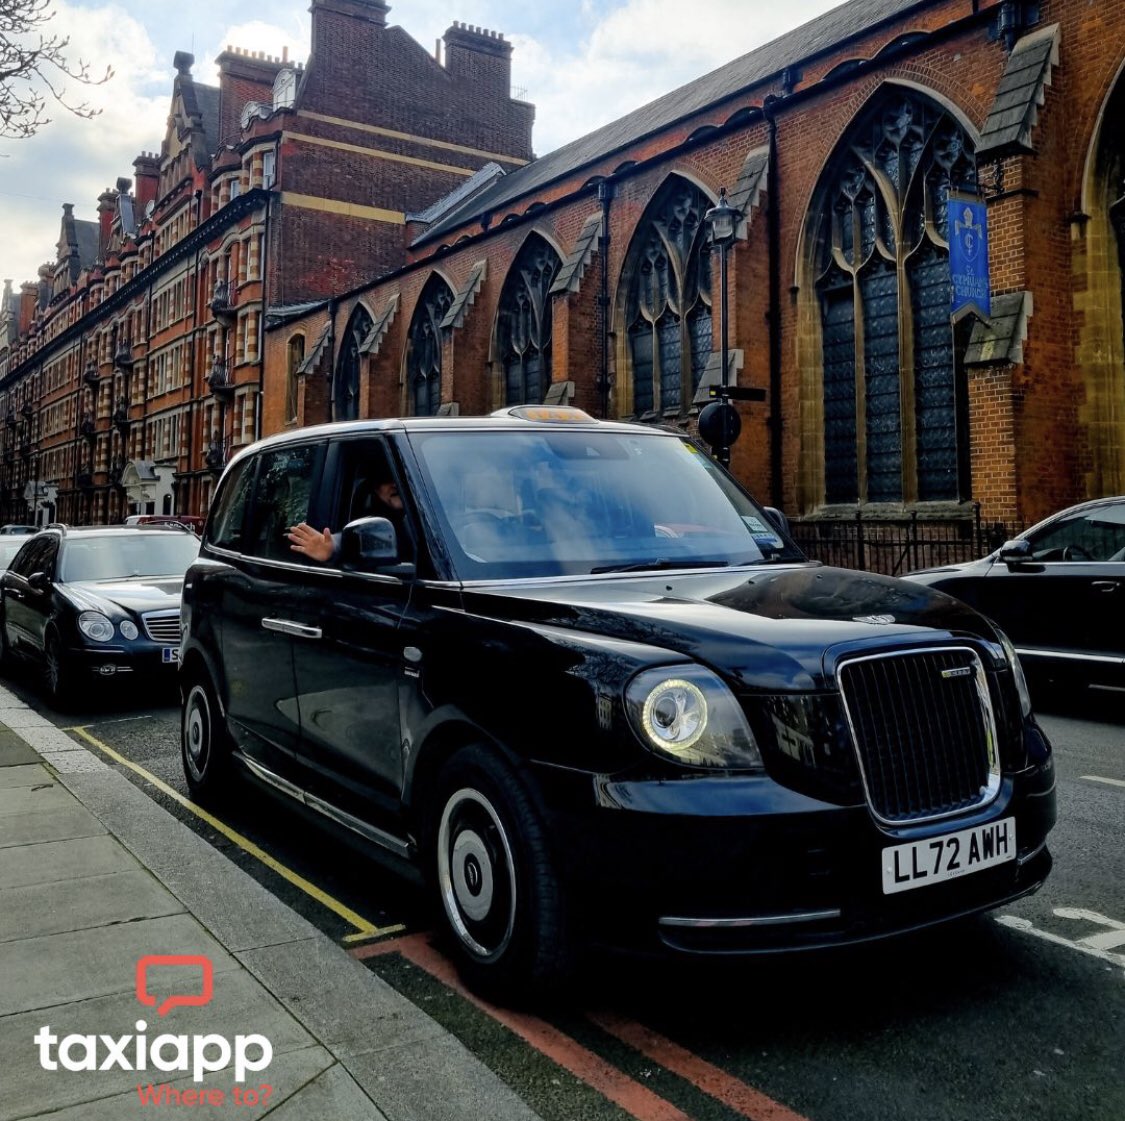 Experience the Best of London in Style - Hop in a Classic Black Cab and Use Our Taxiapp for a Seamless Ride🚖🏃📍

#londoncabbie #electrictaxi #centrallondon #london #eastlondon #northlondon  #southlondon #towerbridge #taxiapp #tbt